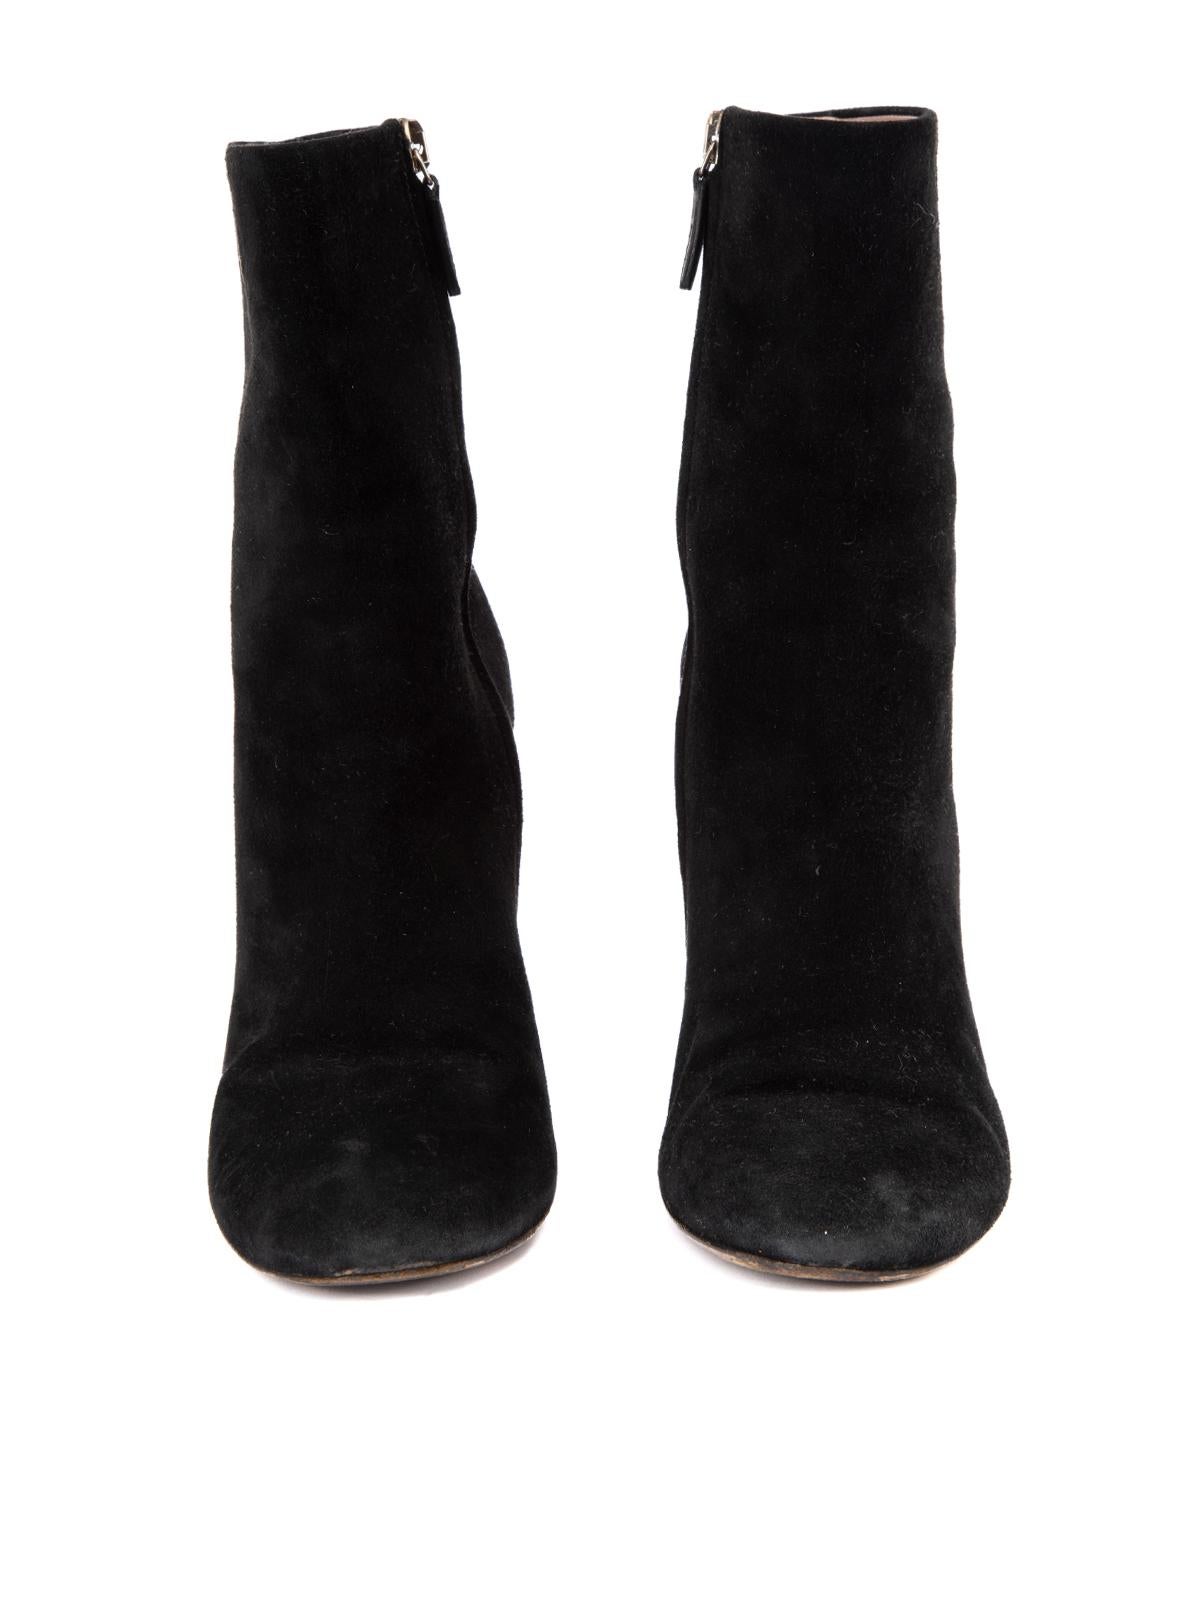 Pre-Loved Gucci Women's Black Suede Wedged Ankle Boots In Good Condition For Sale In London, GB